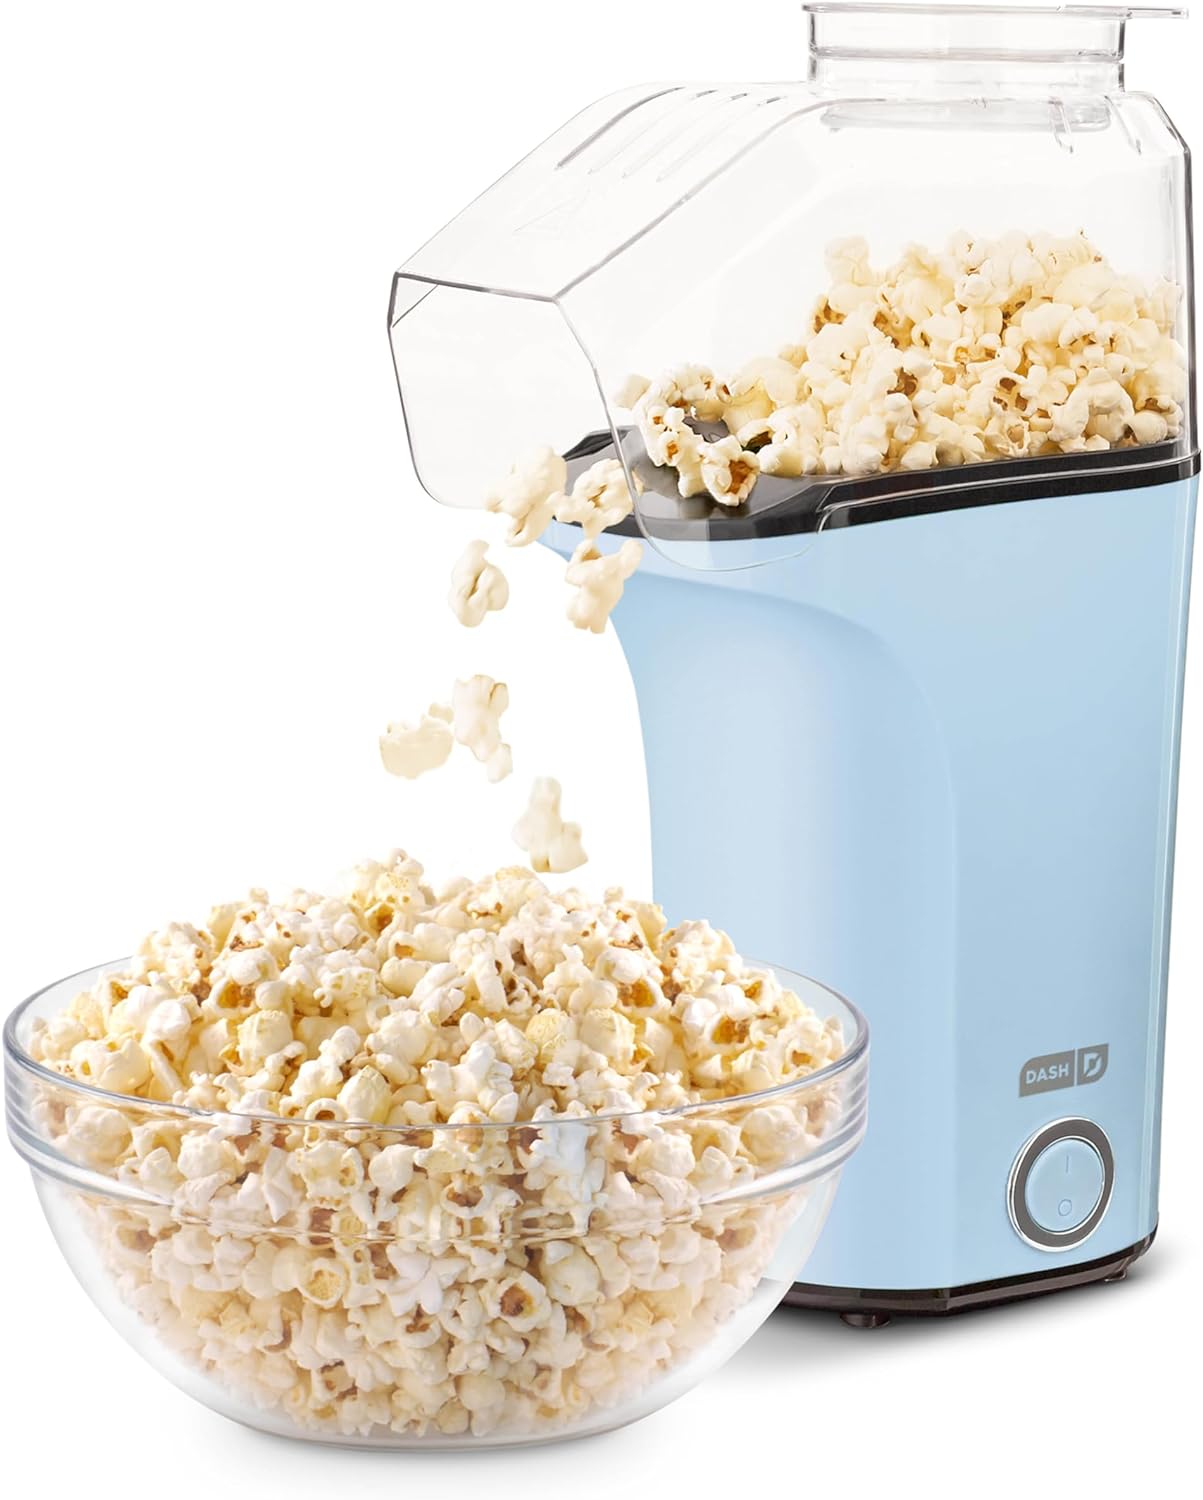 This is my second time purchasing this popcorn popper. I purchased it again because it is just so easy to use ( just pour in kernels and push the button ), and after 2 years, something happened where warm air was still coming out, but popcorn was not popping. I checked to see if it was the popcorn itself, but it was not. This was disappointing. Nevertheless, I re-purchased, and I am back to enjoying quick, easy, tasty popcorn! It does take a little while for the popcorn to start popping, but thi